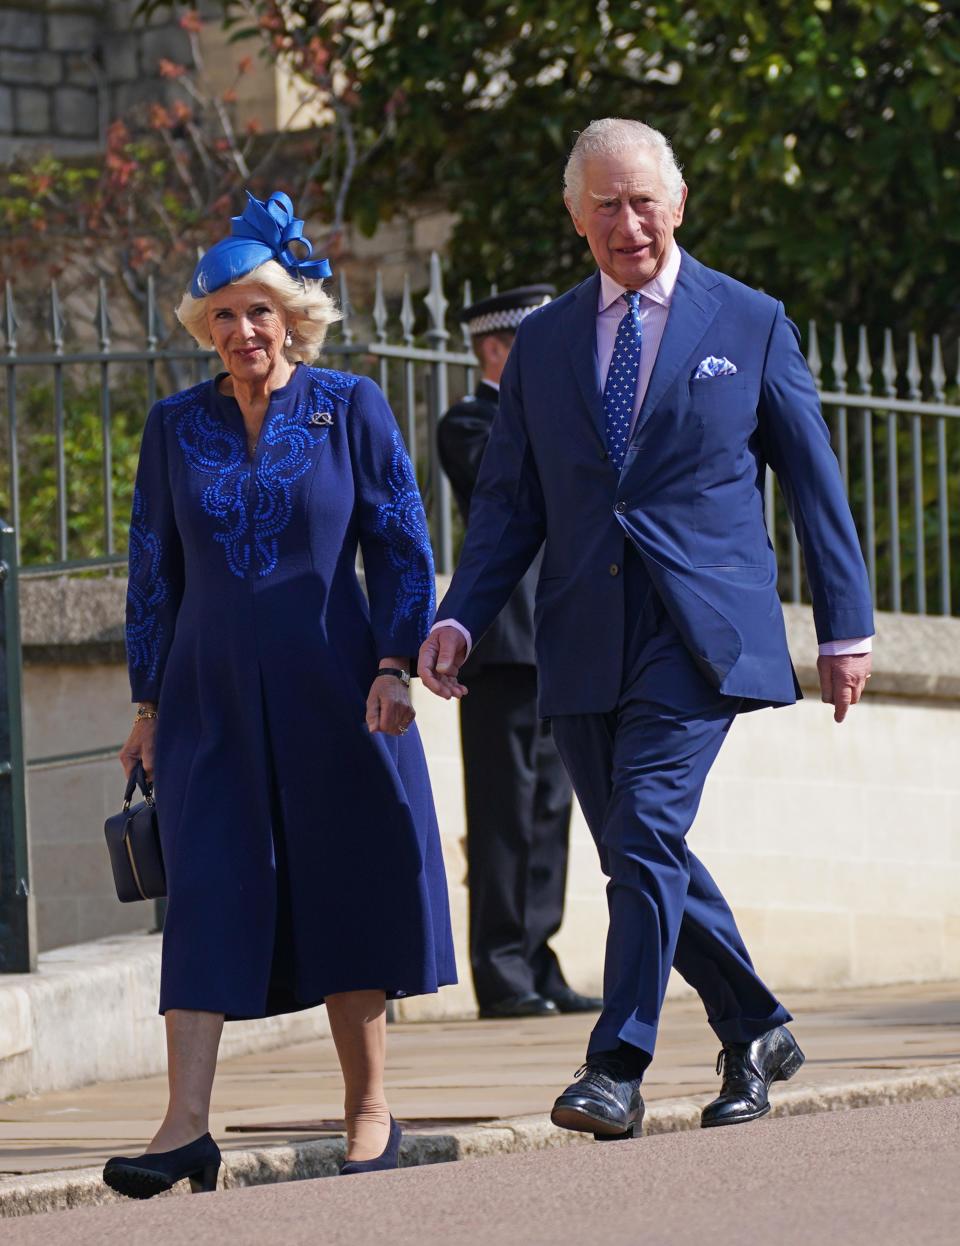 King Charles III and Queen Consort Camilla will wear different crowns during the coronation.